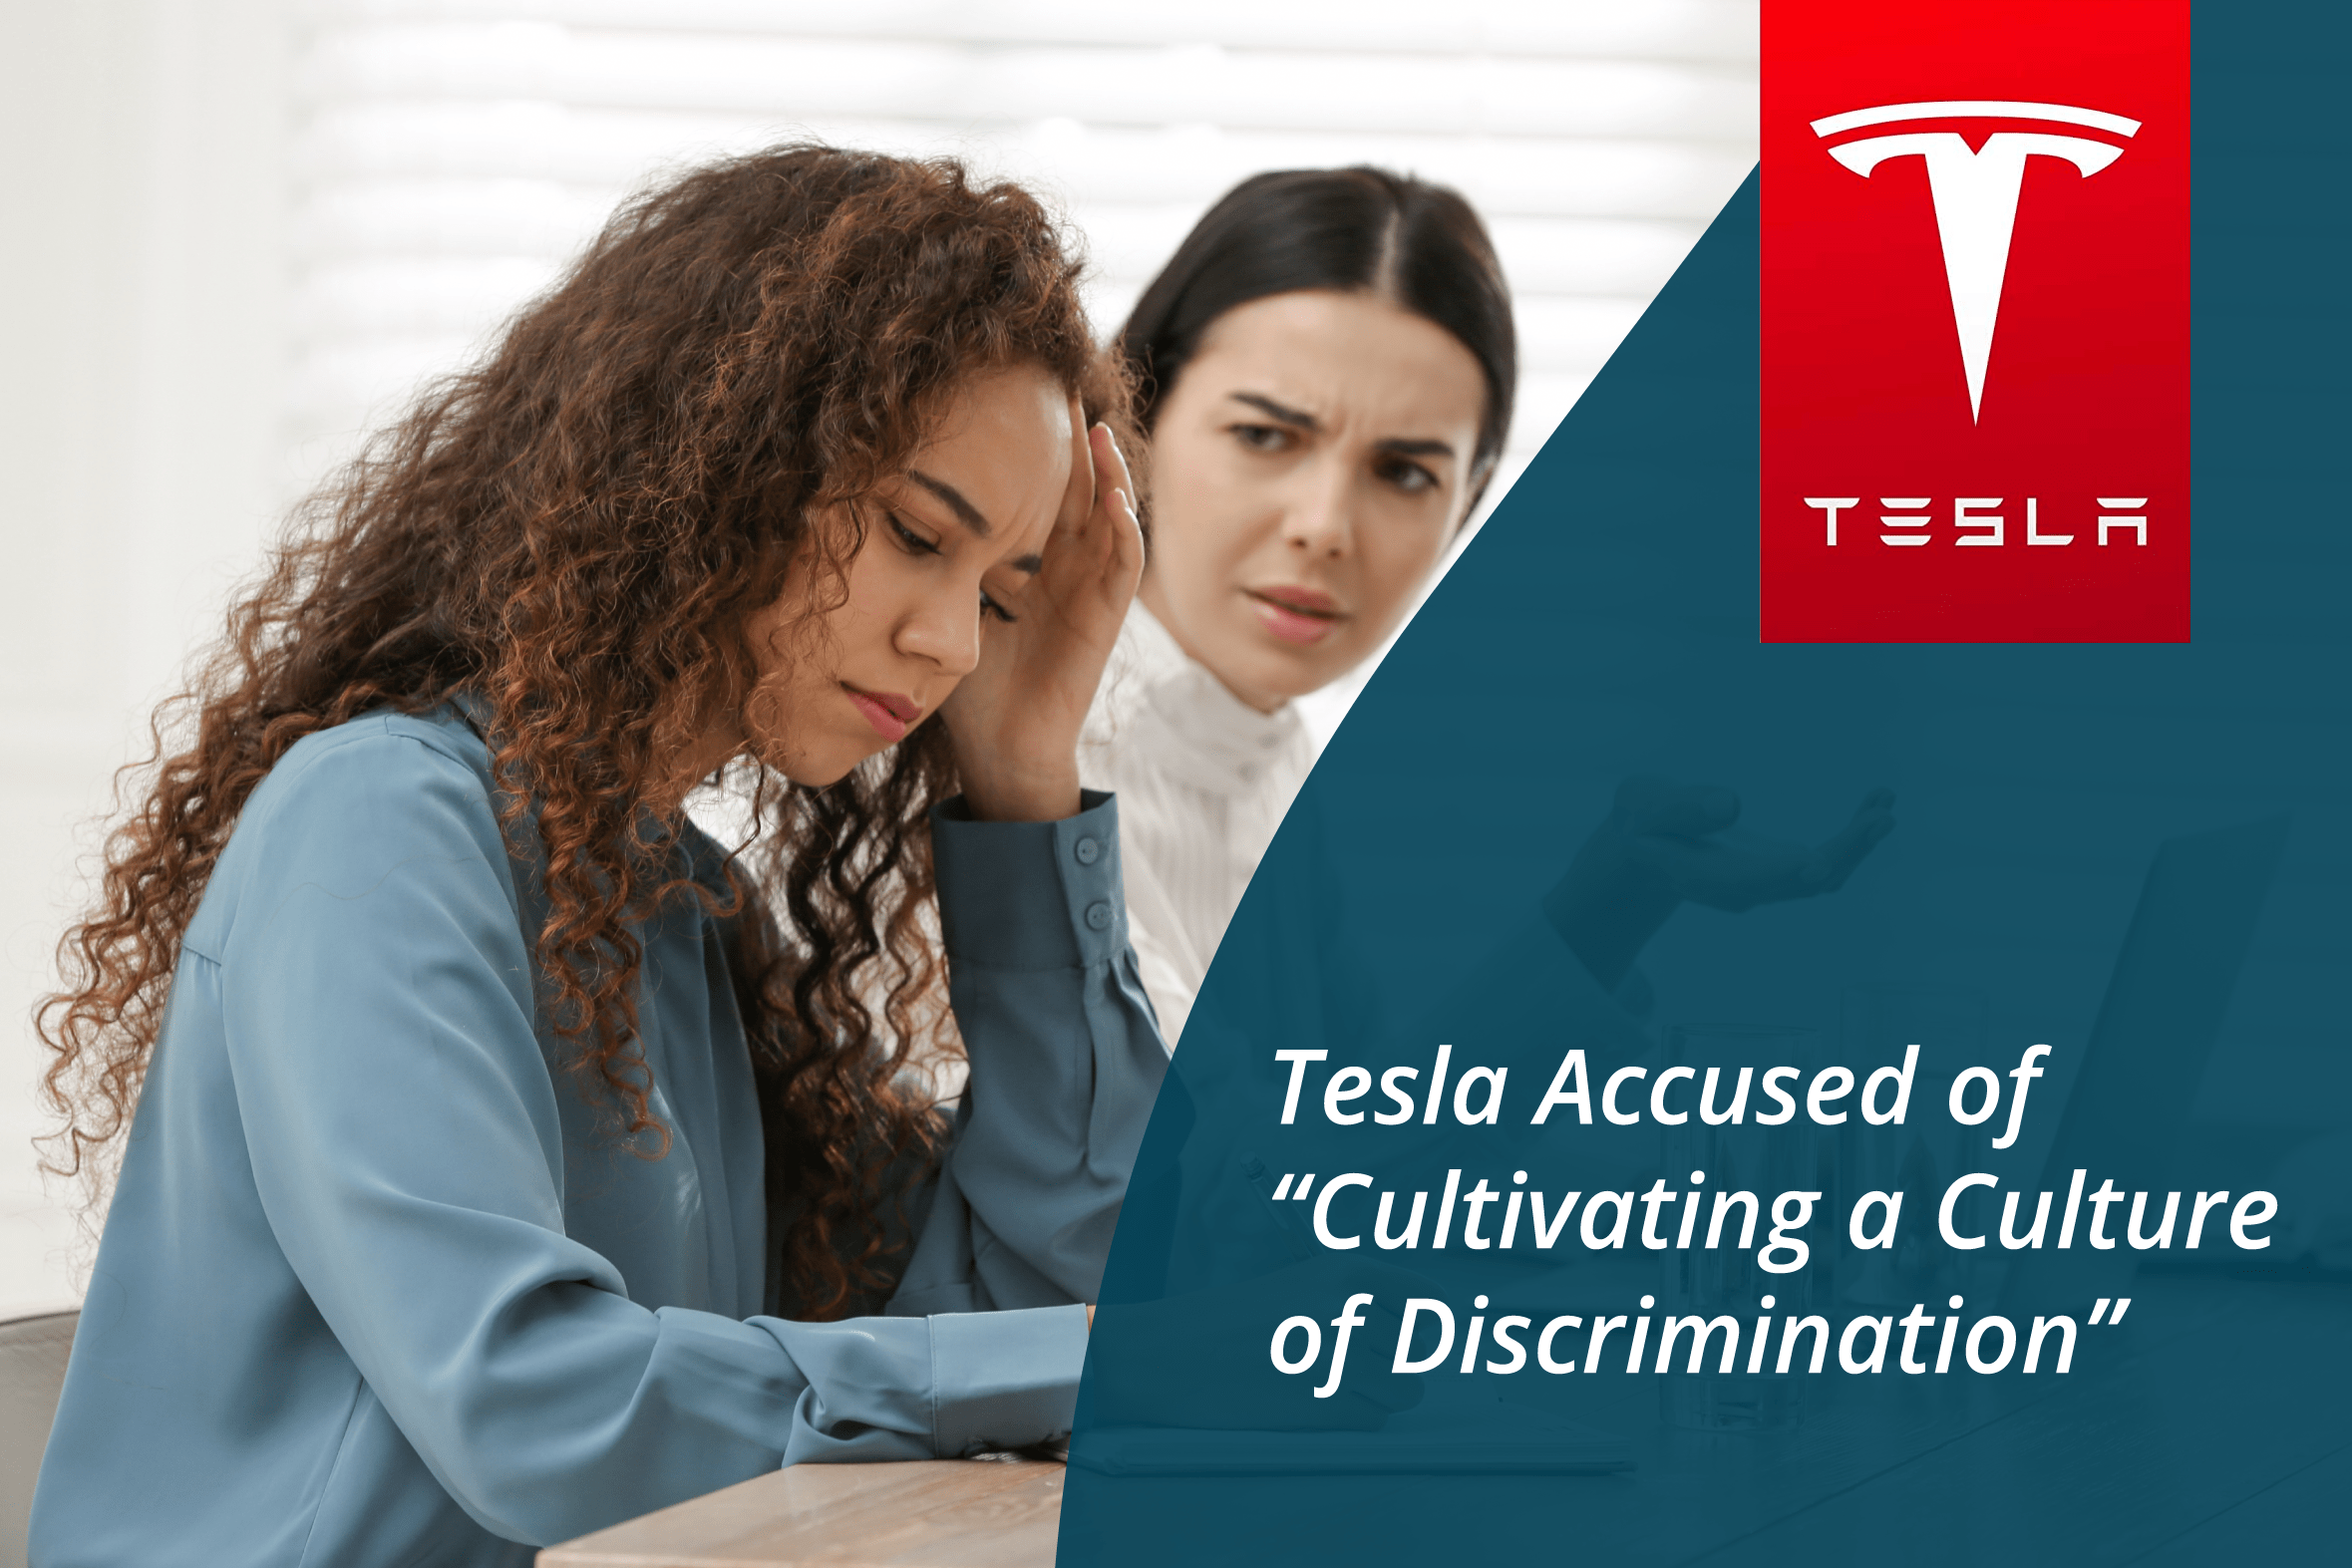 Tesla Facing a Wide Variety of Organizational Culture Issues